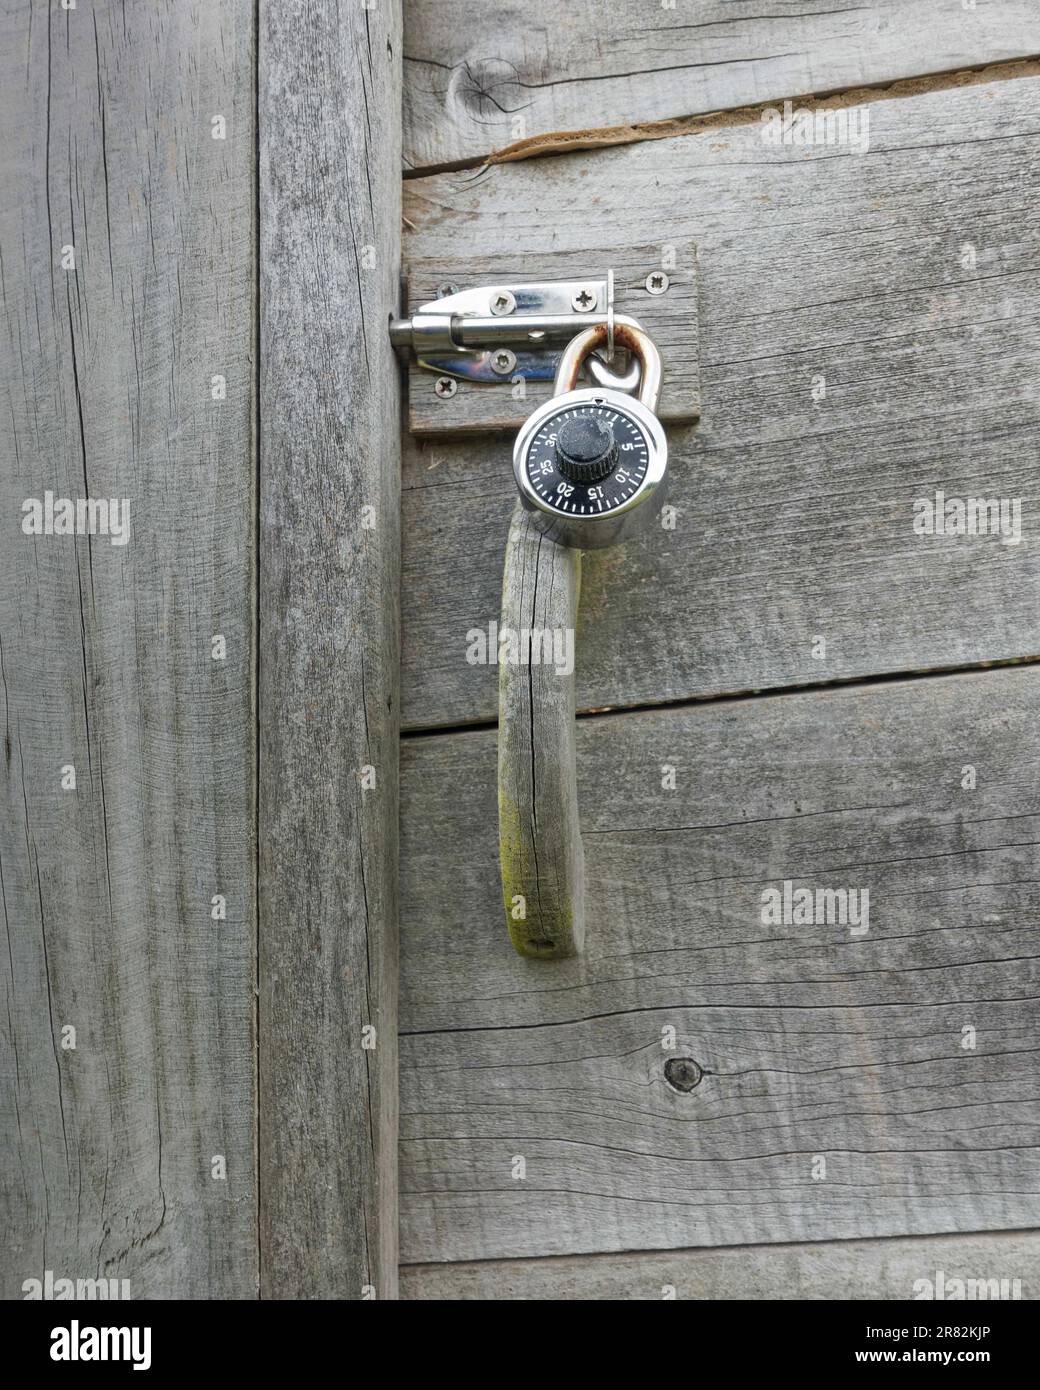 A combination lock on a bolt preventing the opening of a cupboard. Stock Photo